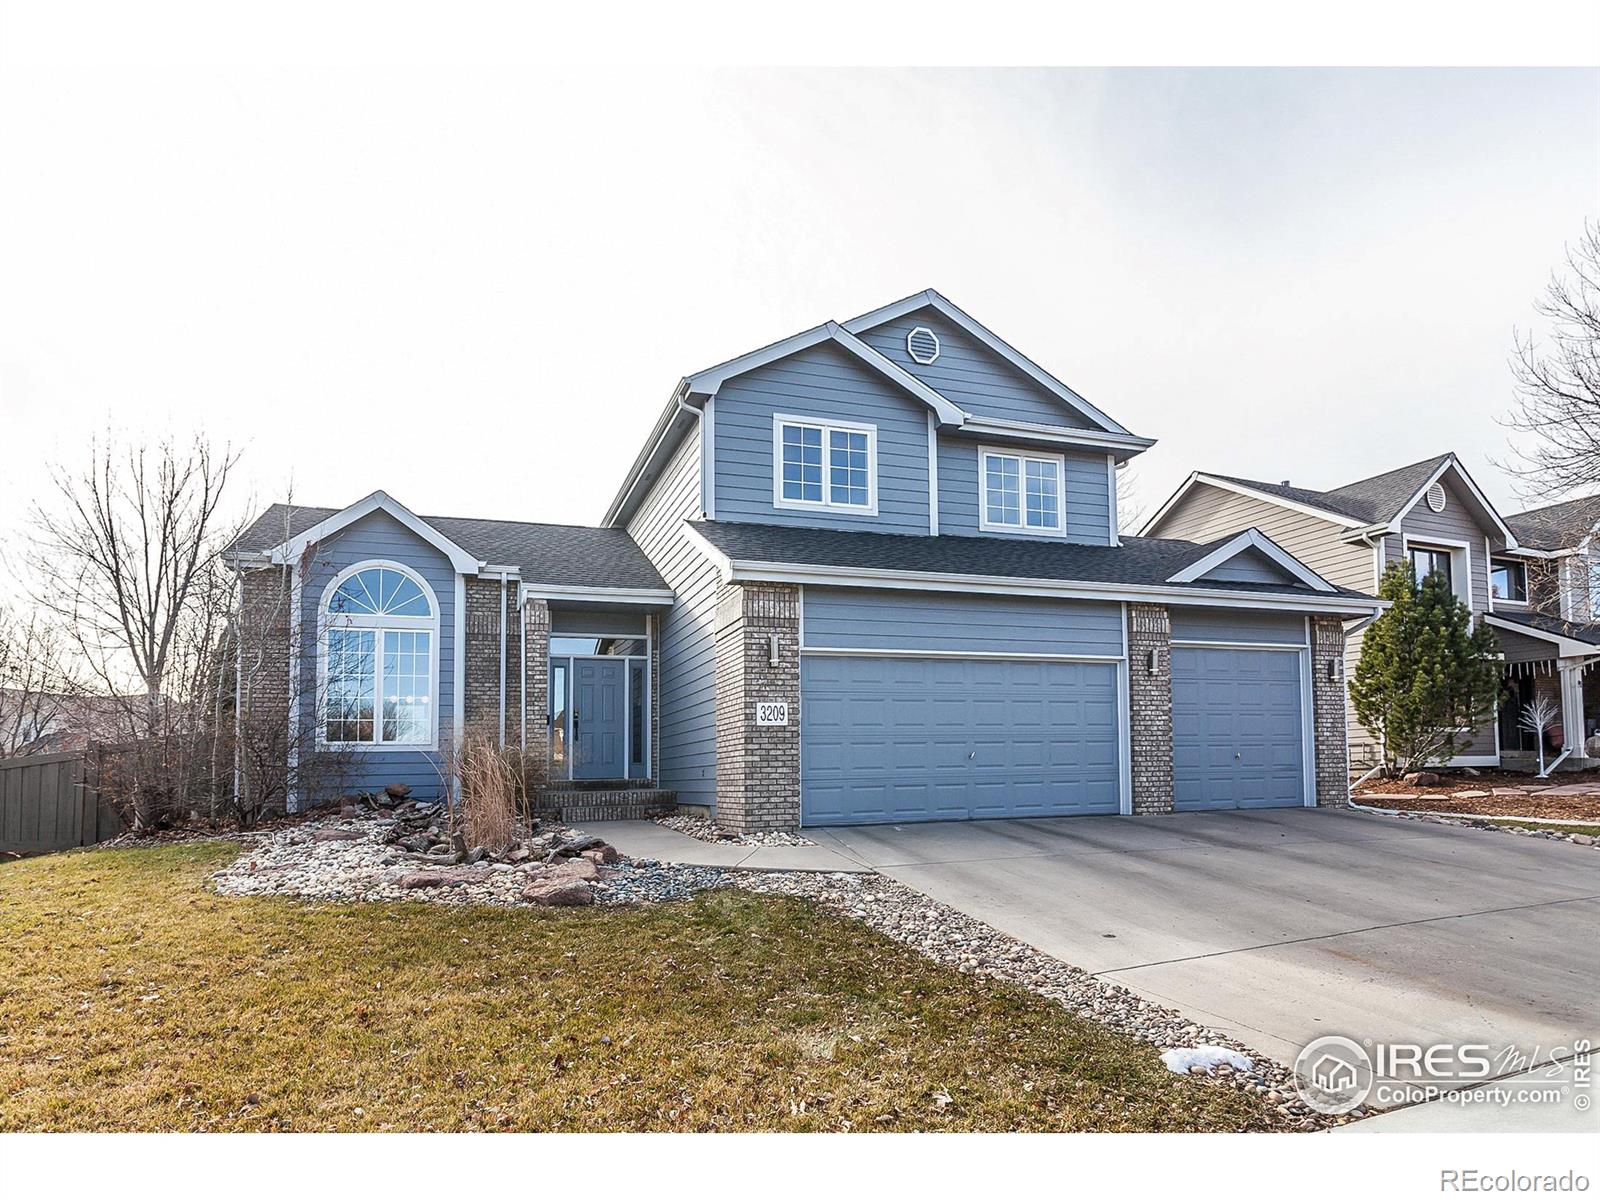 3209  Shallow Pond Drive, fort collins MLS: 4567891001070 Beds: 5 Baths: 4 Price: $835,000